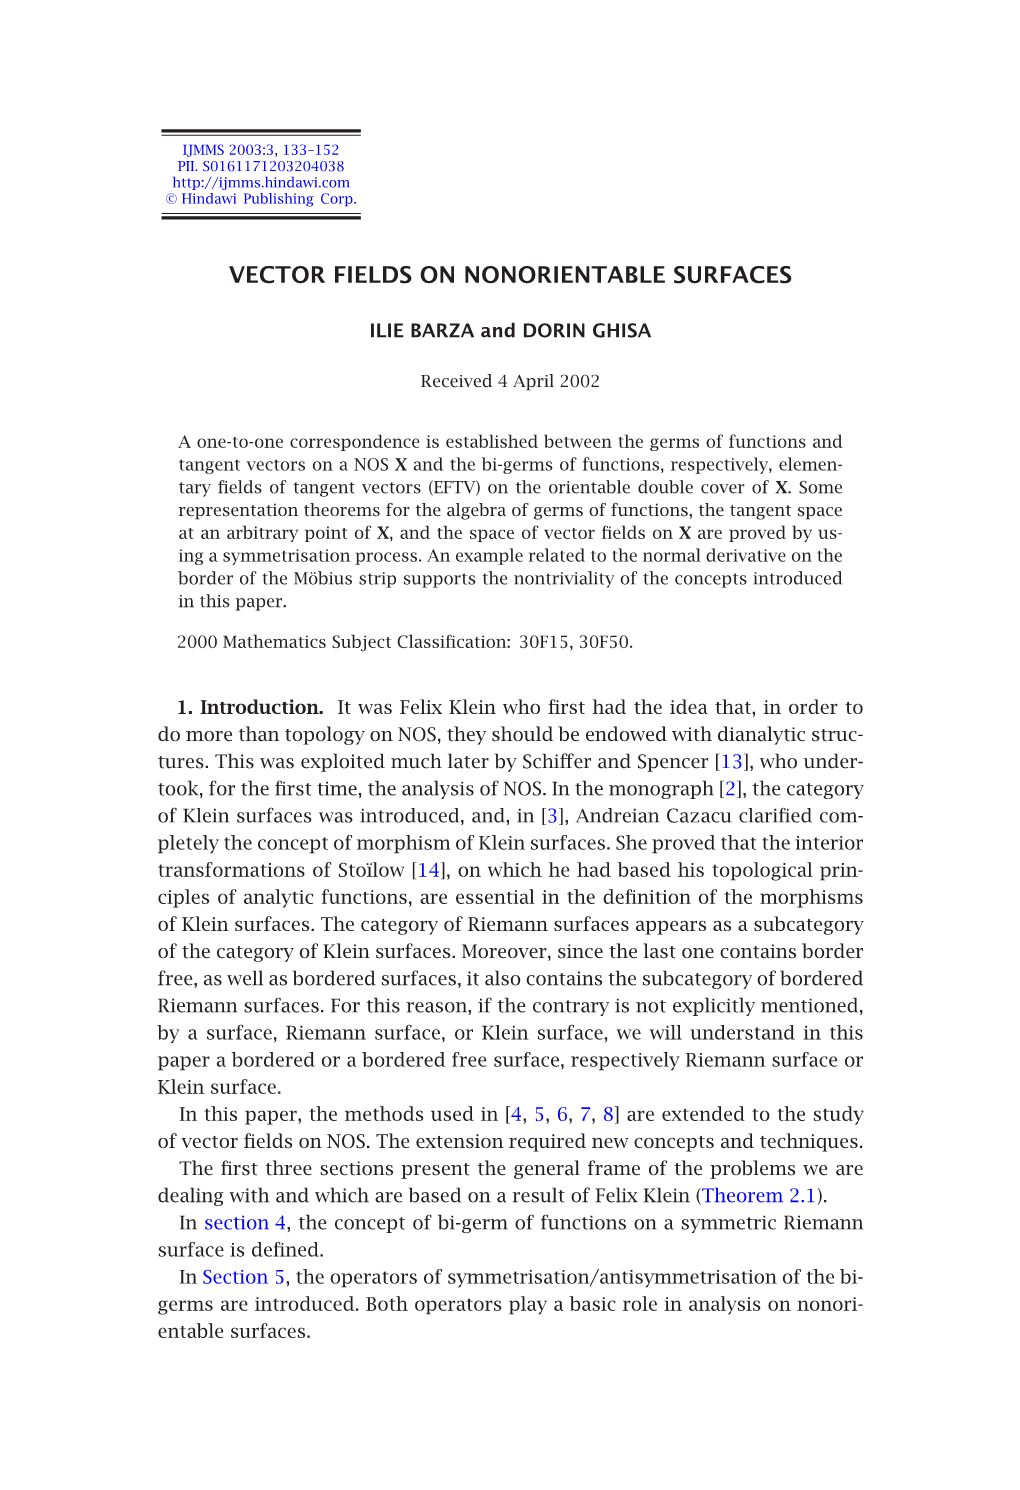 Vector Fields on Nonorientable Surfaces